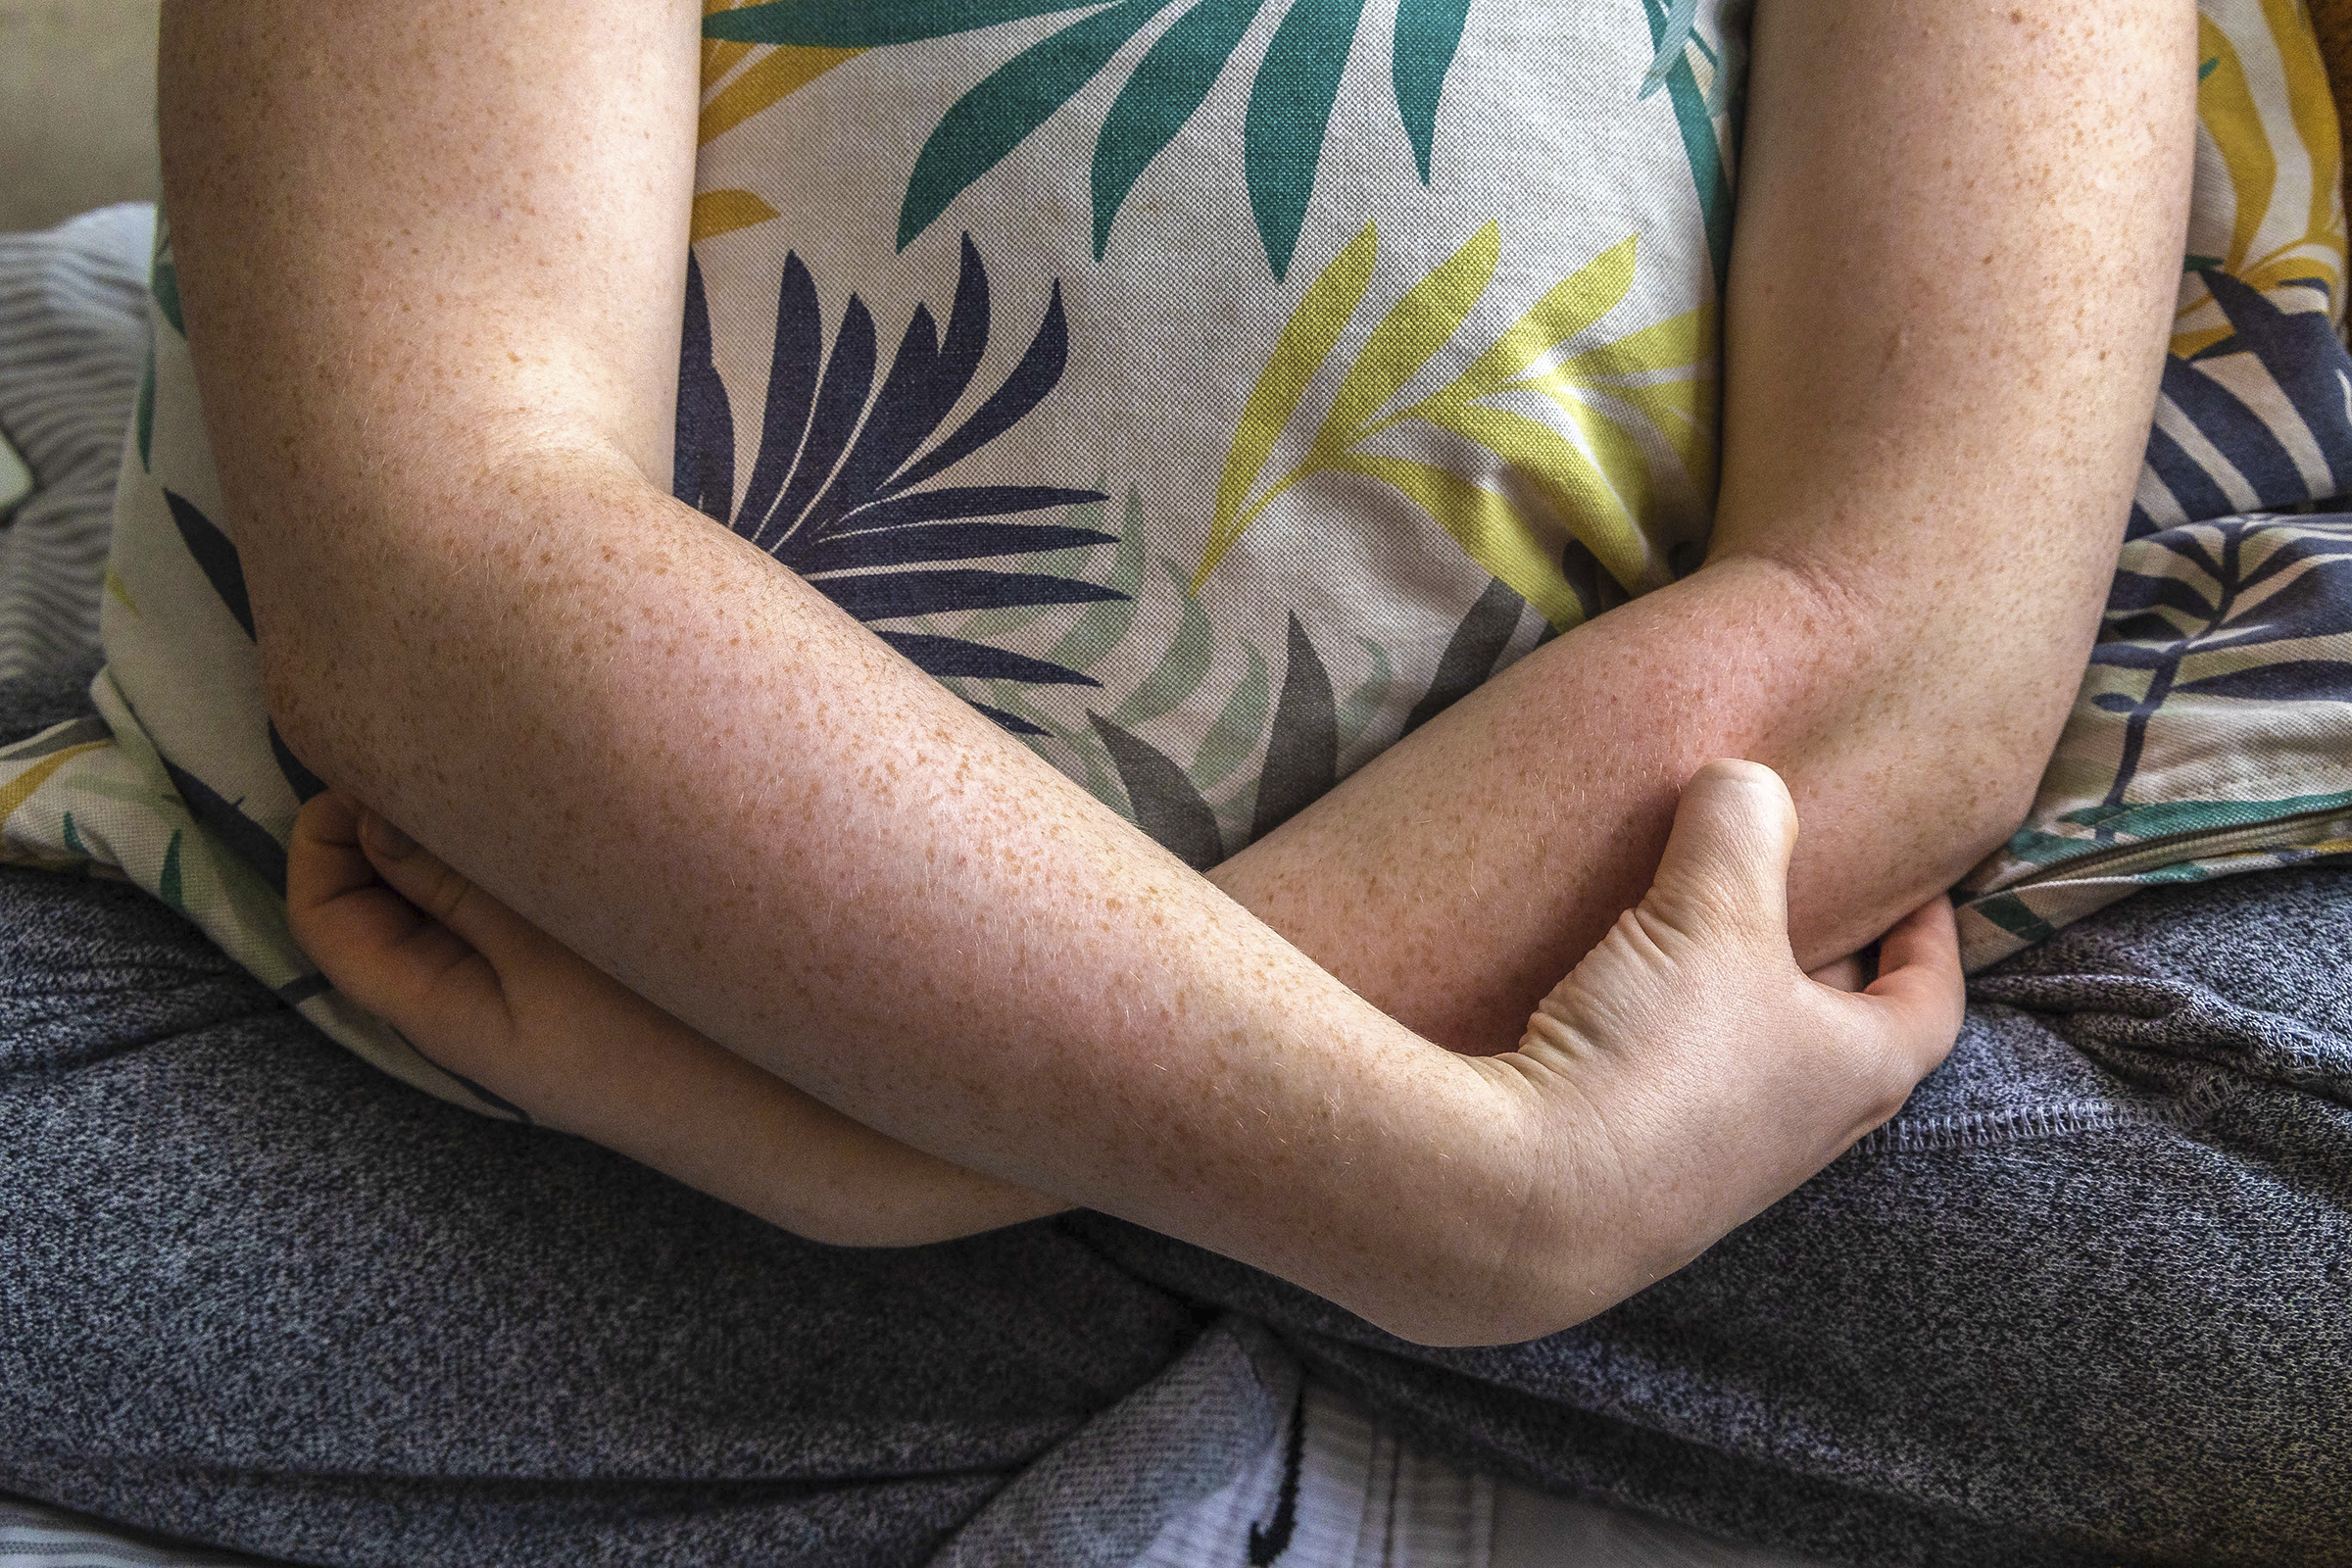 A woman's arms crossed, hugging a pillow, in a crossed legged position, pinching her own forearm as a way to cause self harm and feel something.